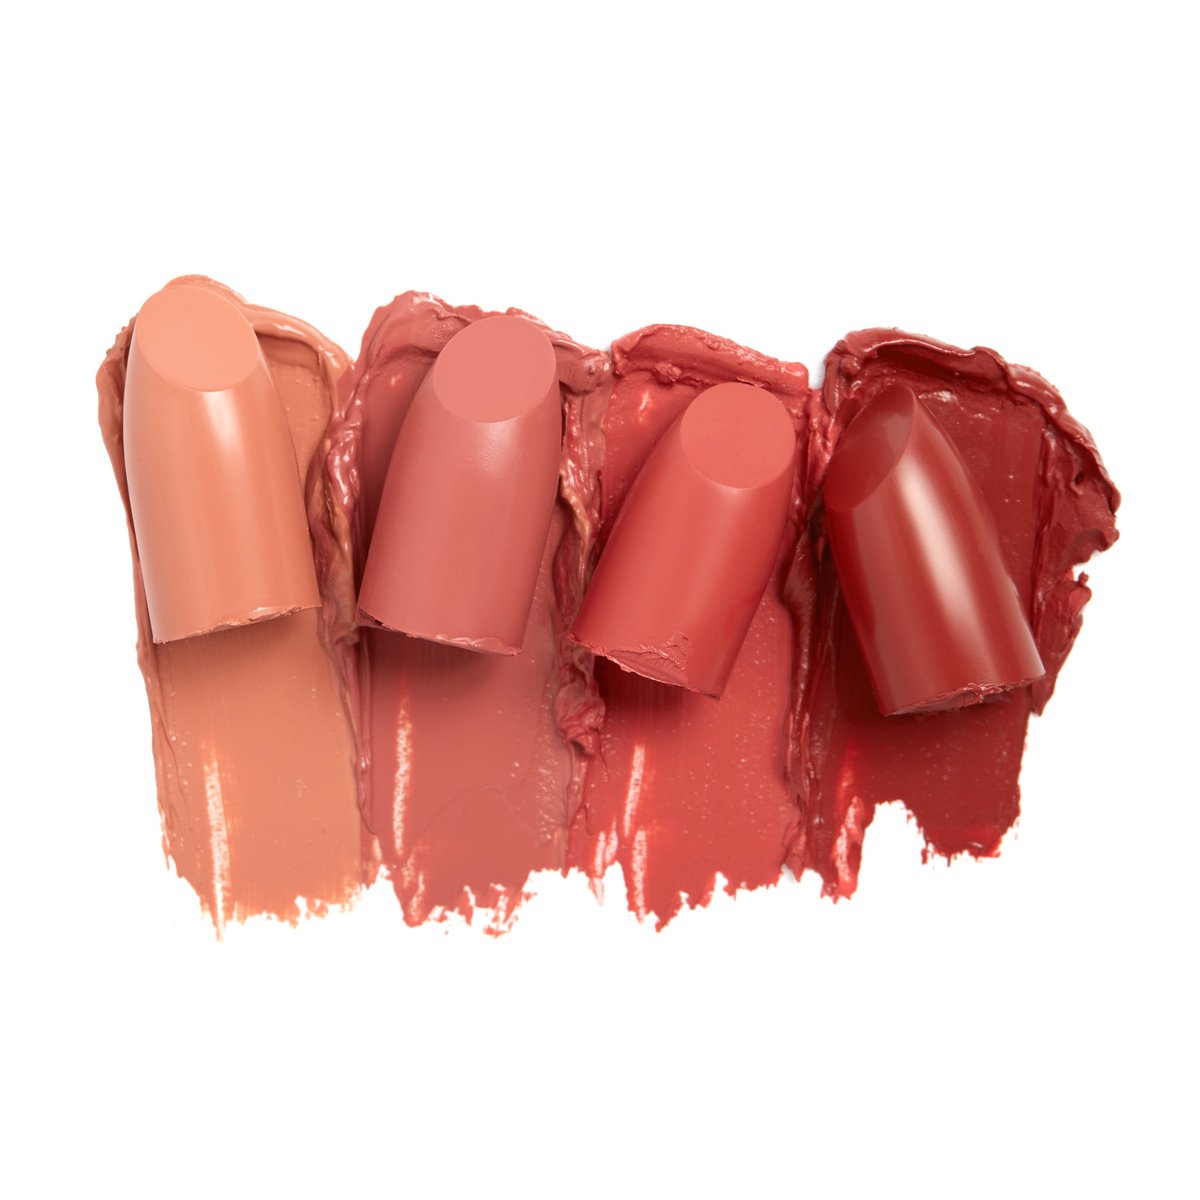 RT @kkwbeauty: Crème Lipsticks in Peach 1-4. Available tomorrow at https://t.co/32qaKbs5YG at 12PM PST https://t.co/M7e1Sec0Mo